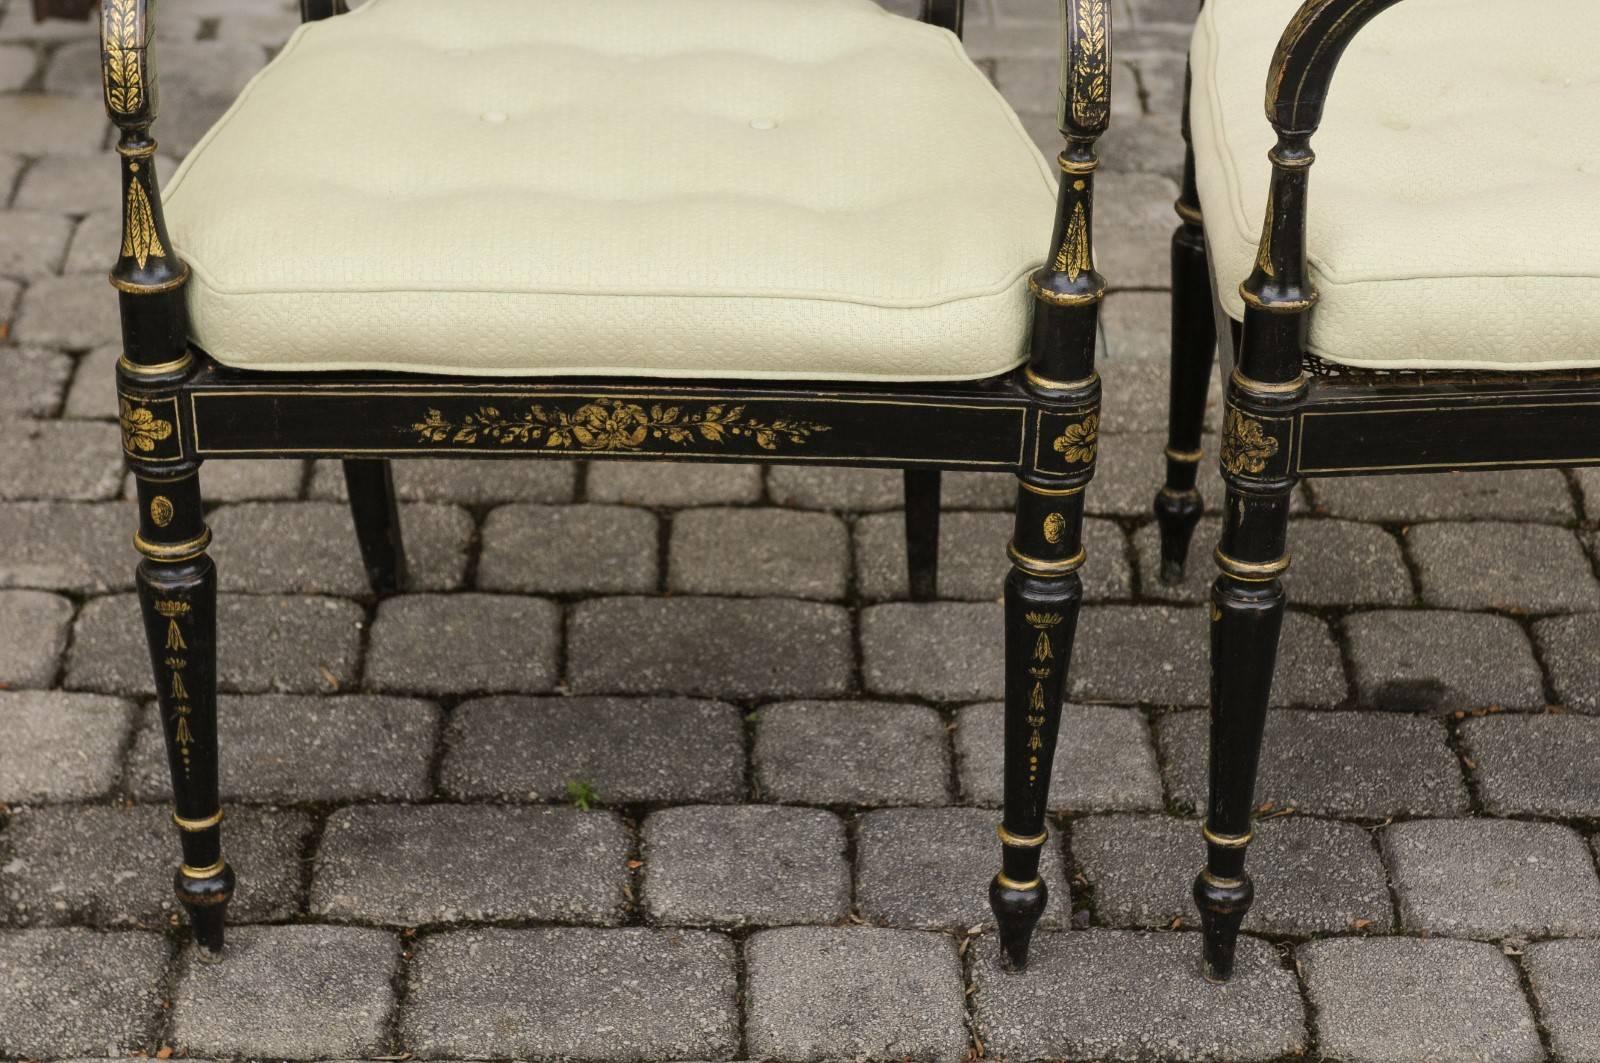 Pair of English 1850s Regency Style Ebonized Wood Armchairs with Gilded Accents 2